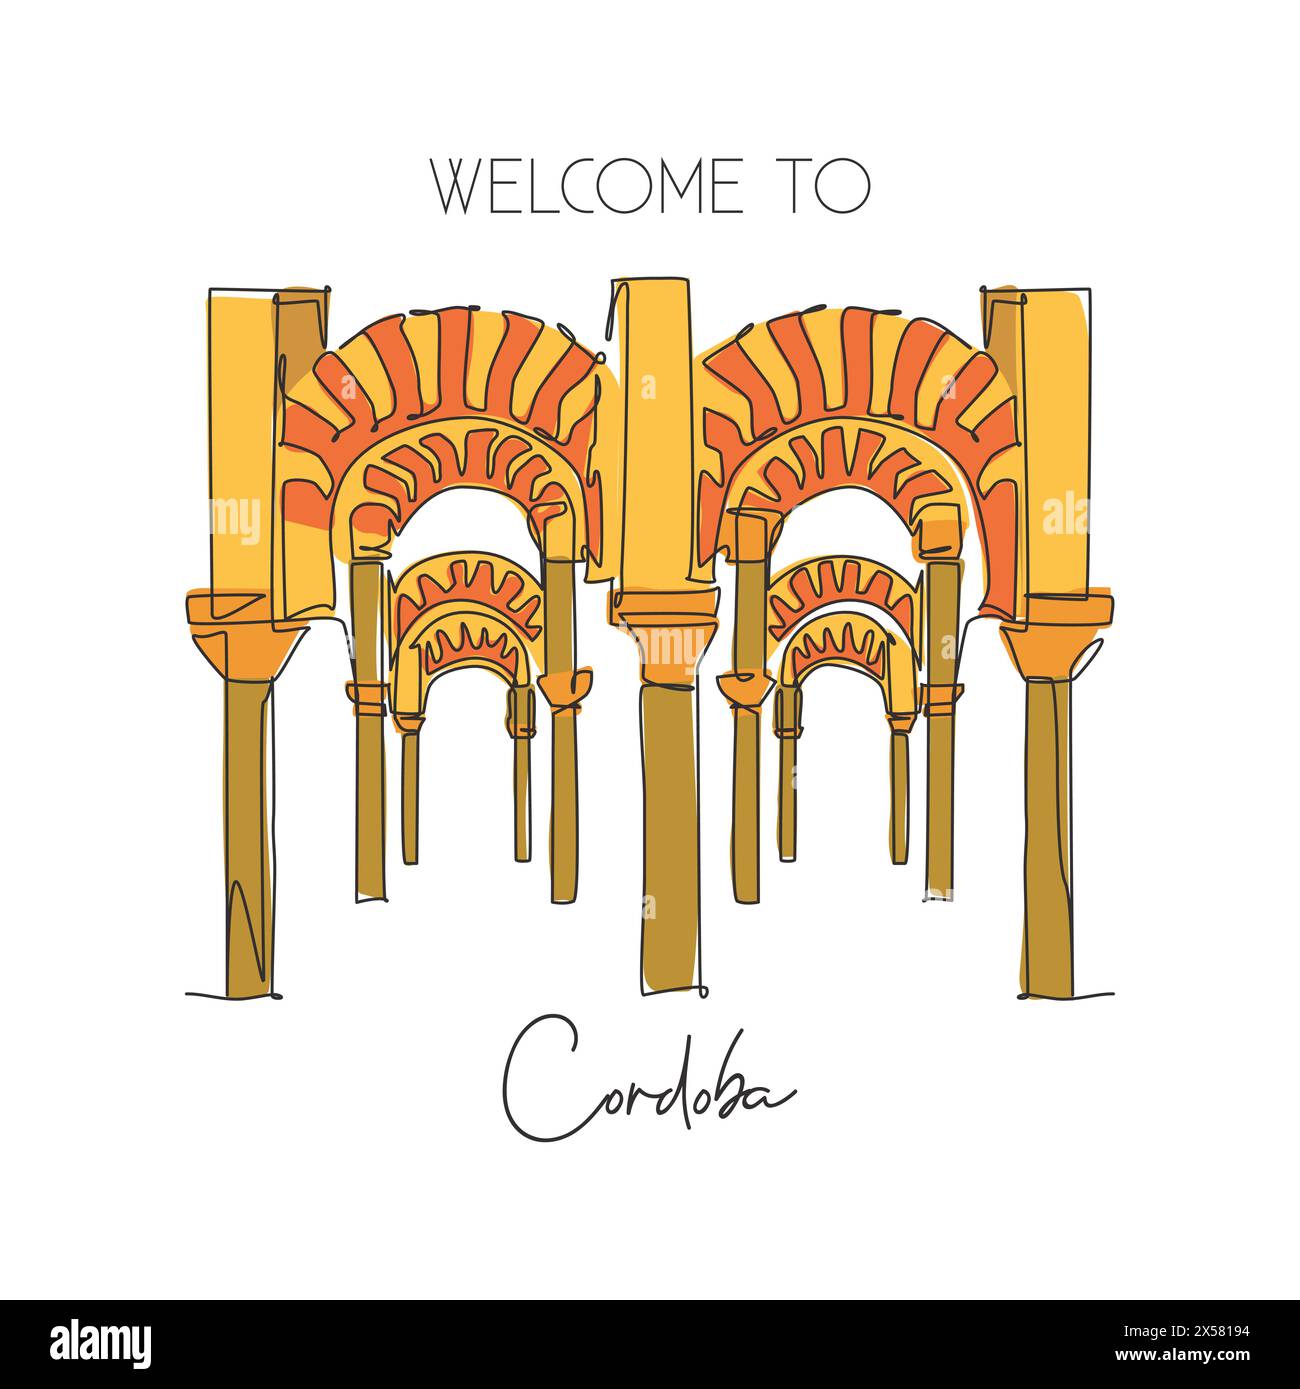 One continuous line drawing Cordoba Mosque or Mezquita landmark. Beautiful place at Andalusia, Spain. Holiday vacation wall decor poster art concept. Stock Vector